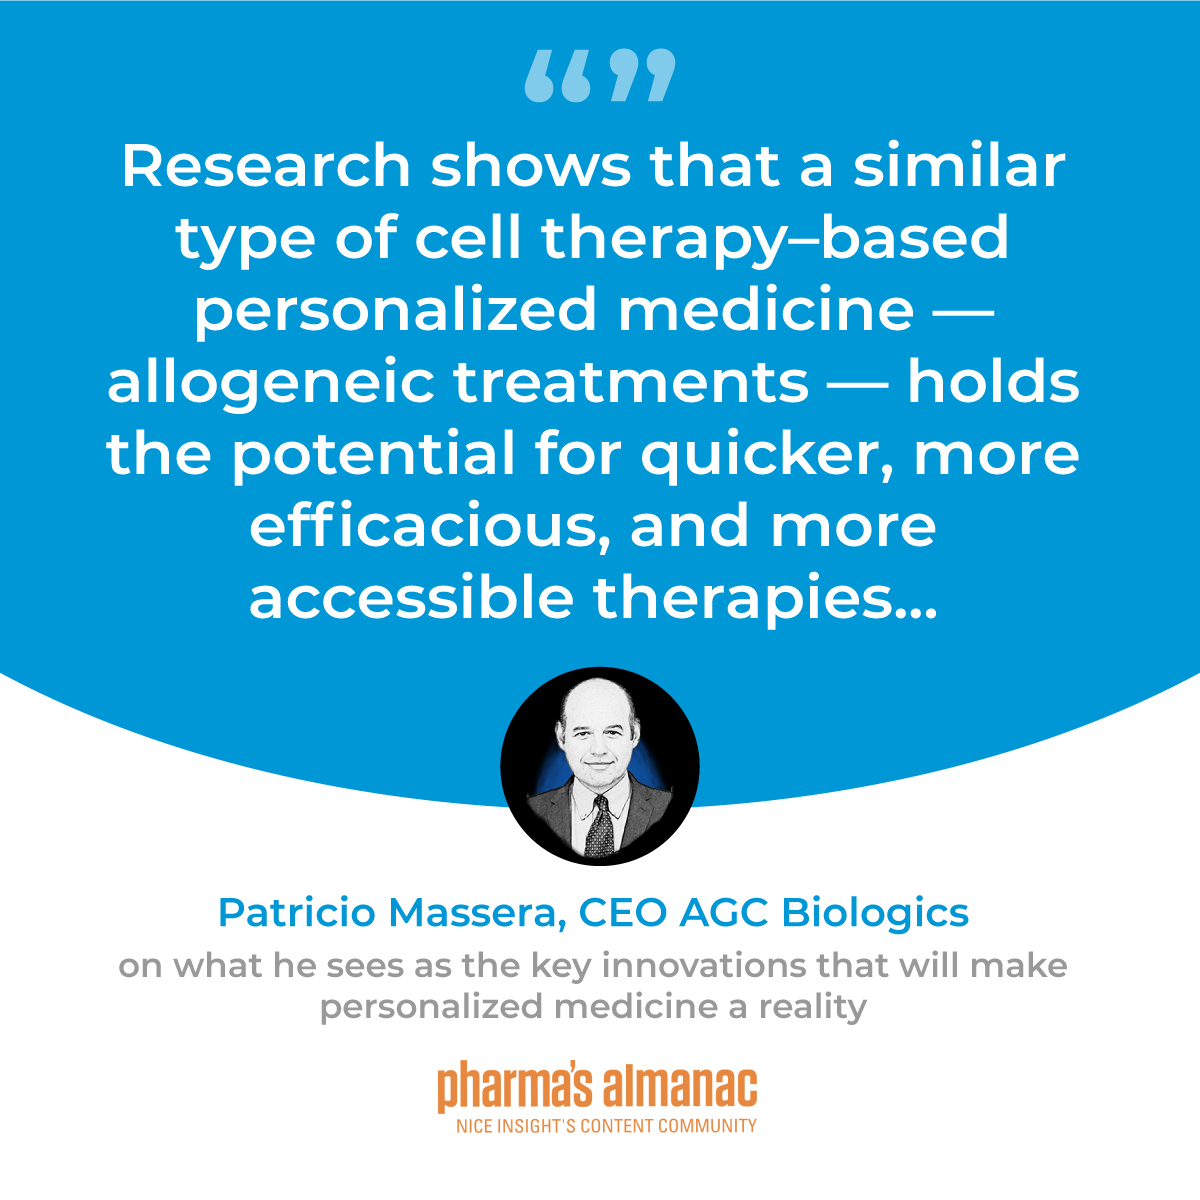 Personalized Medicine in 2022: Allogeneic Treatments Can be the Effective “Brick in the Wall” for Cell and Gene Therapy Treatments